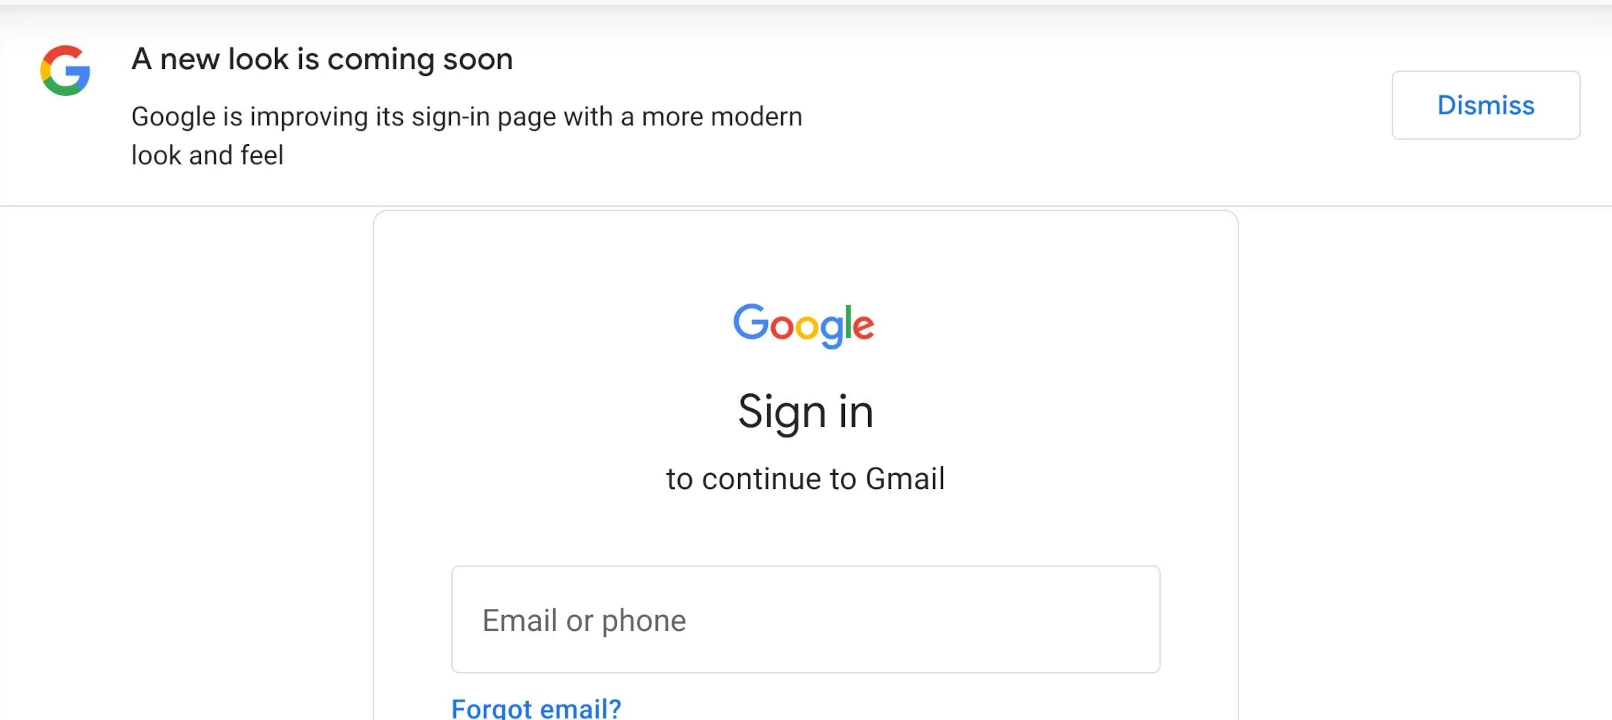 Designing Tomorrow: Google’s Revamp of Sign-In Experiences